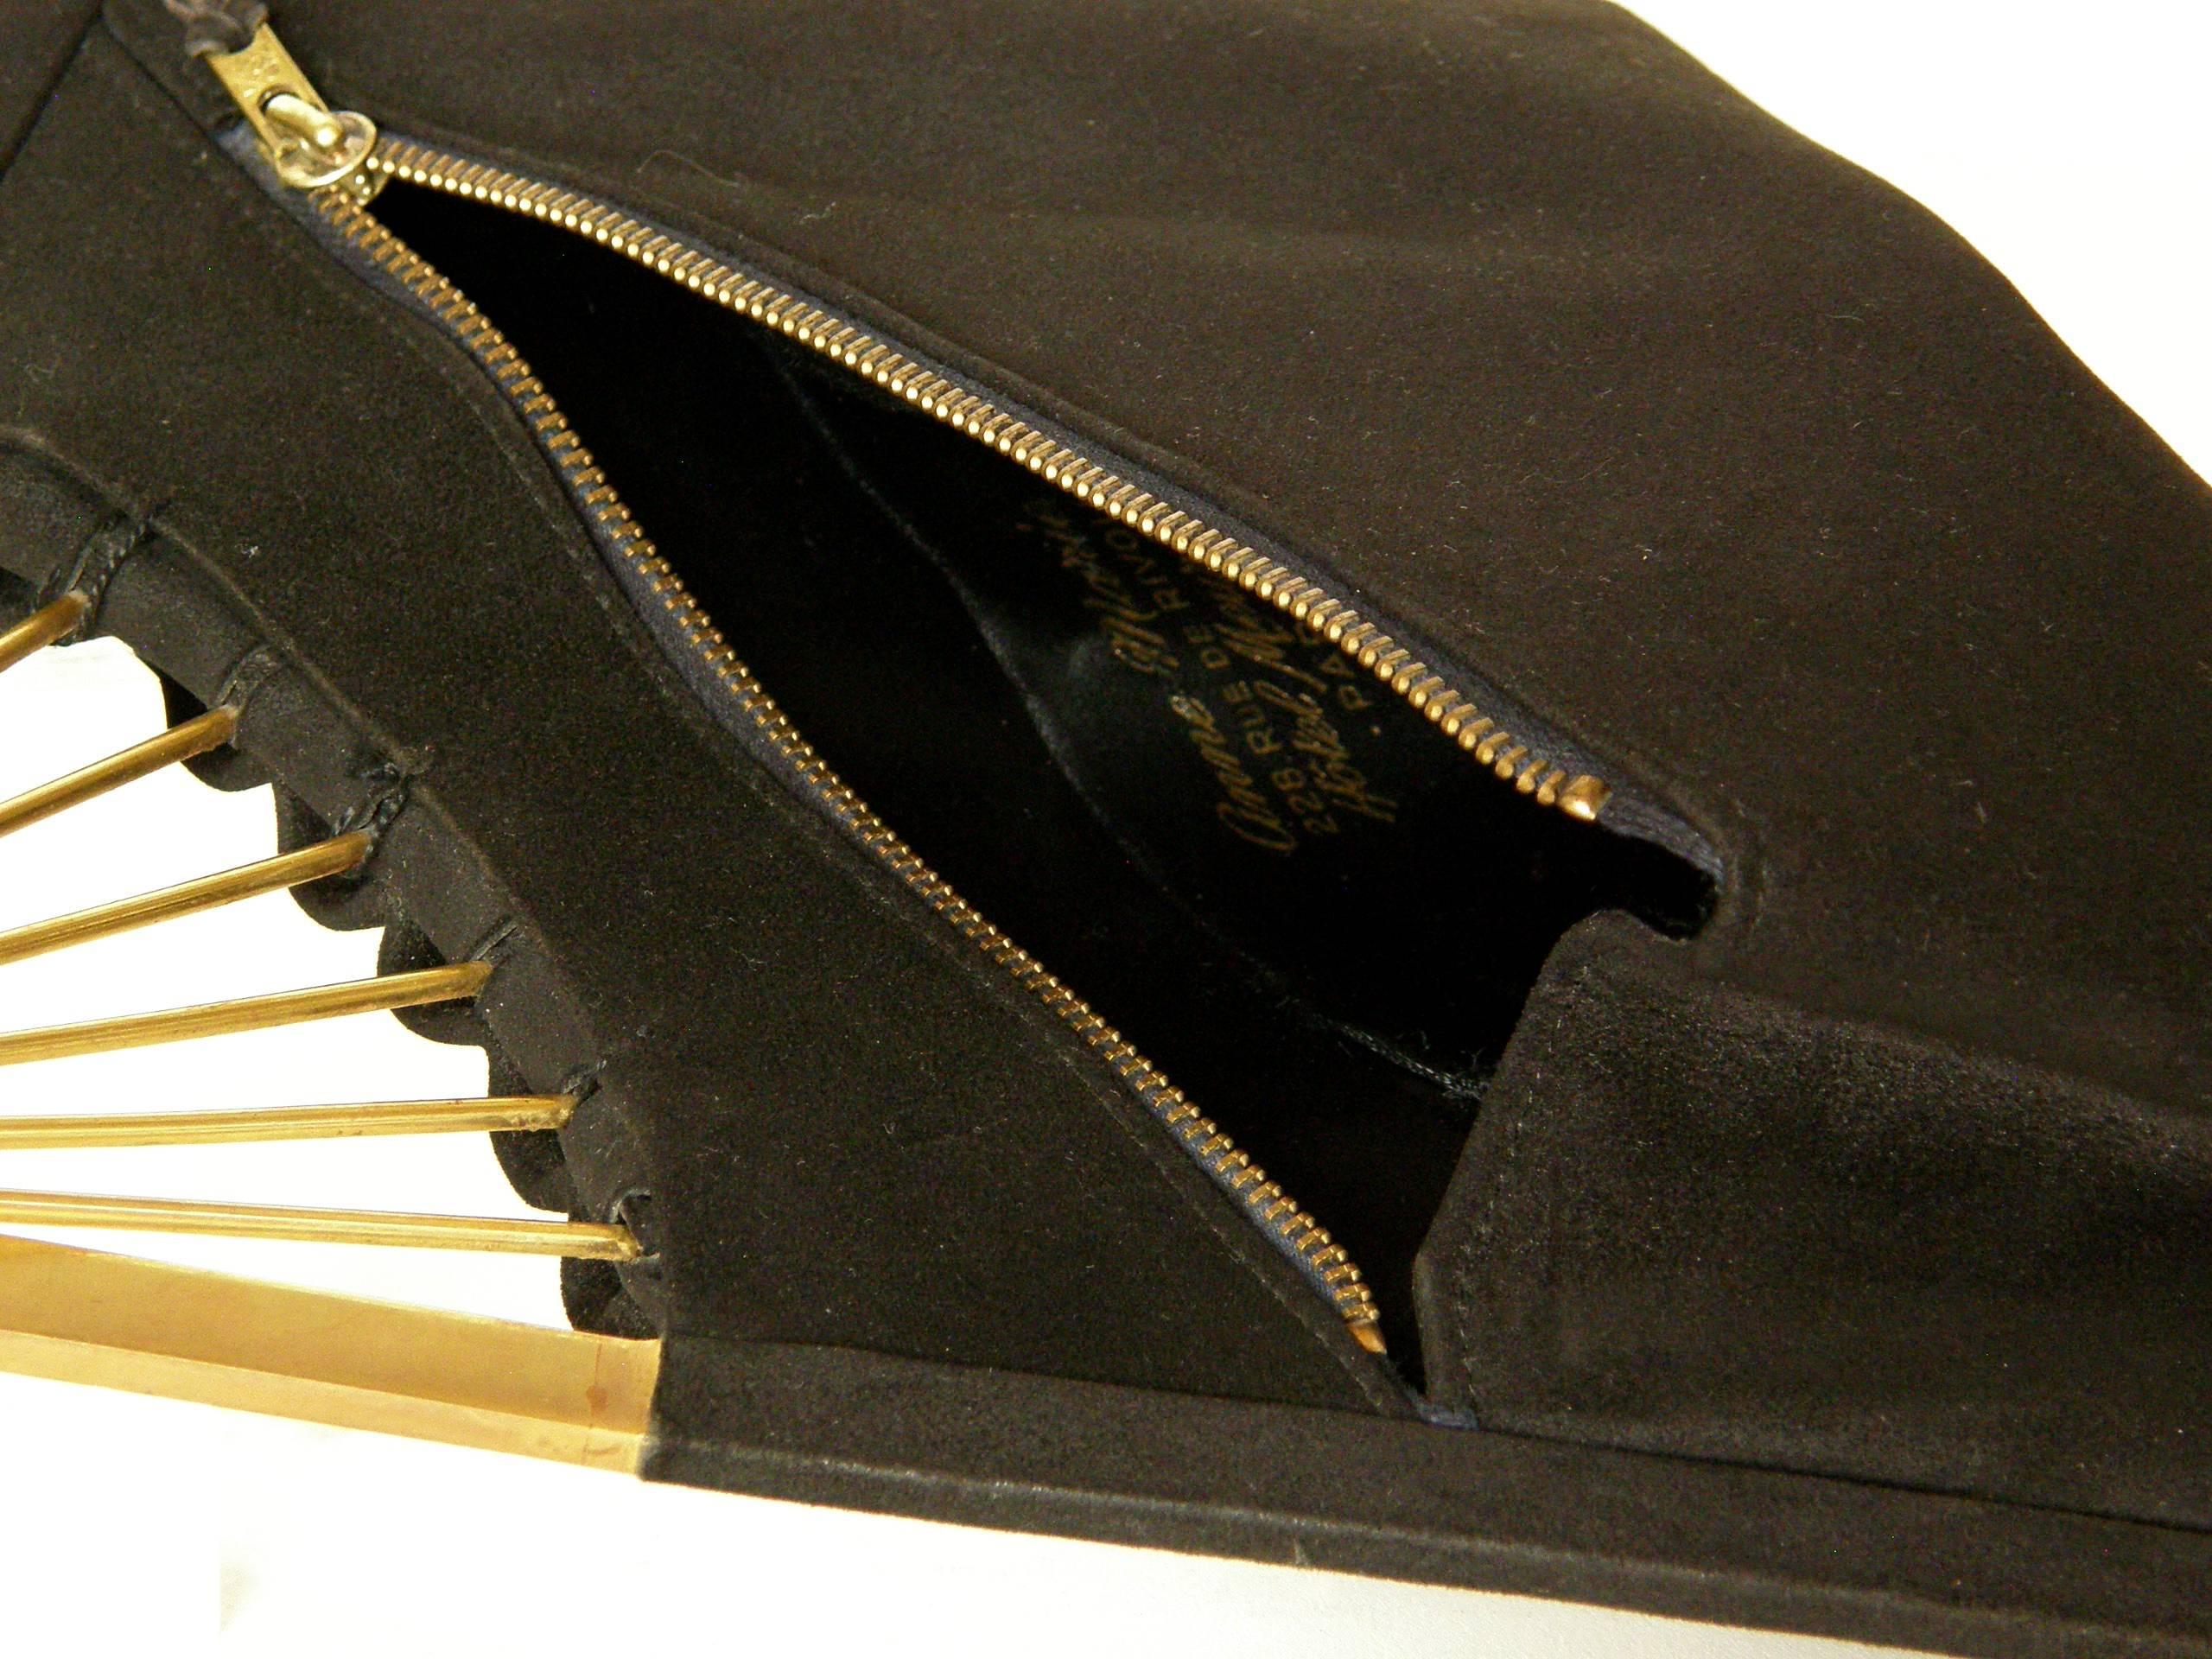 Anne-Marie Black Suede Handbag Shaped Like a Folding Fan In Good Condition For Sale In Chicago, IL